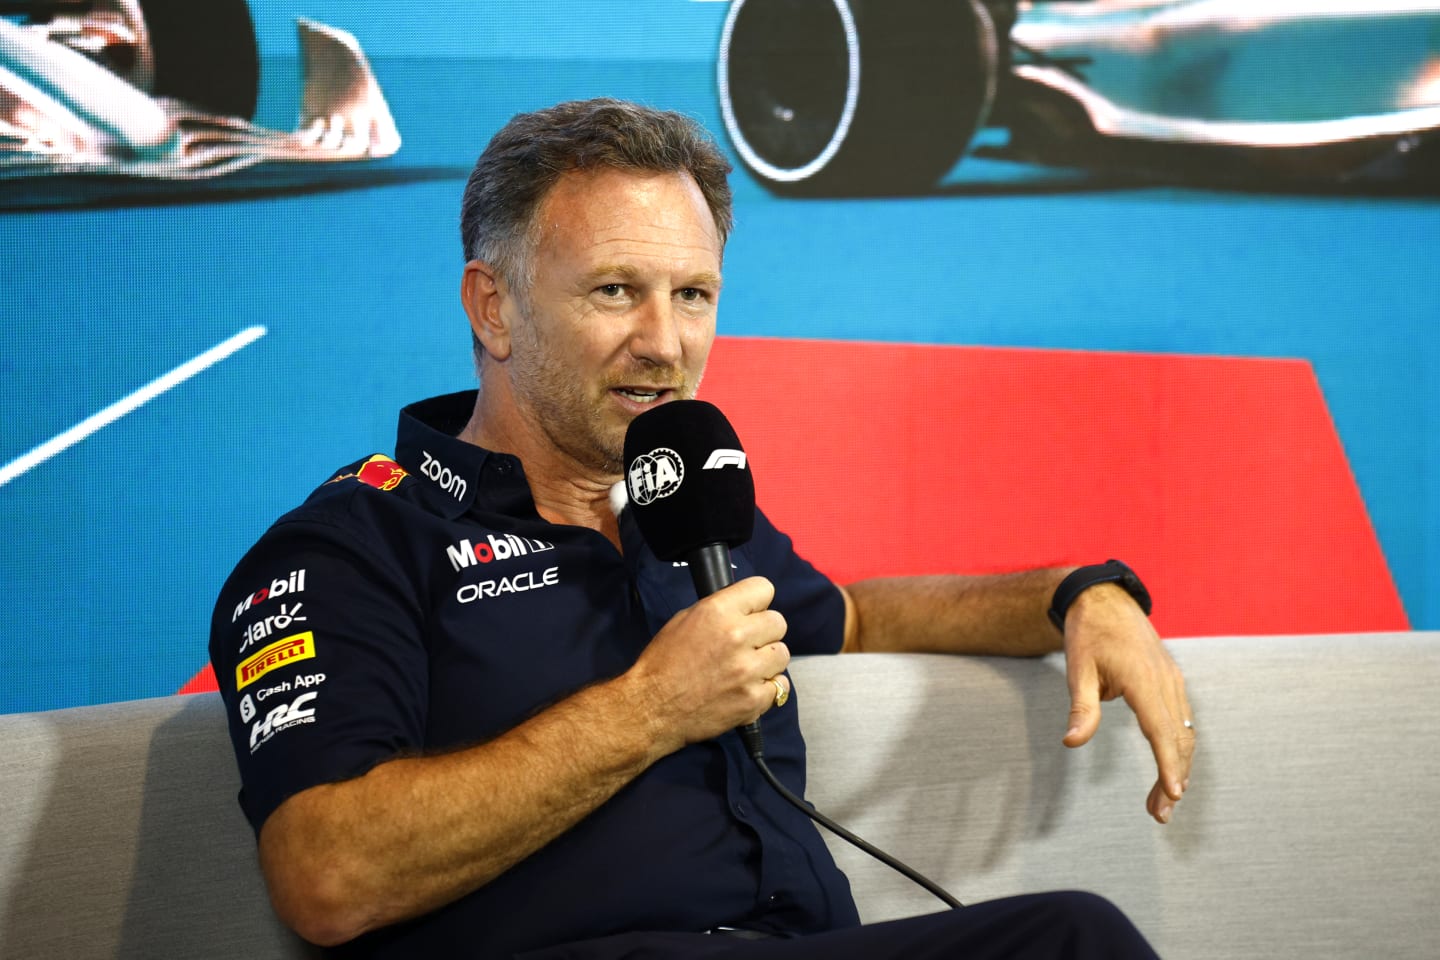 MIAMI, FLORIDA - MAY 05: Red Bull Racing Team Principal Christian Horner attends the Team Principals Press Conference during practice ahead of the F1 Grand Prix of Miami at Miami International Autodrome on May 05, 2023 in Miami, Florida. (Photo by Jared C. Tilton/Getty Images)